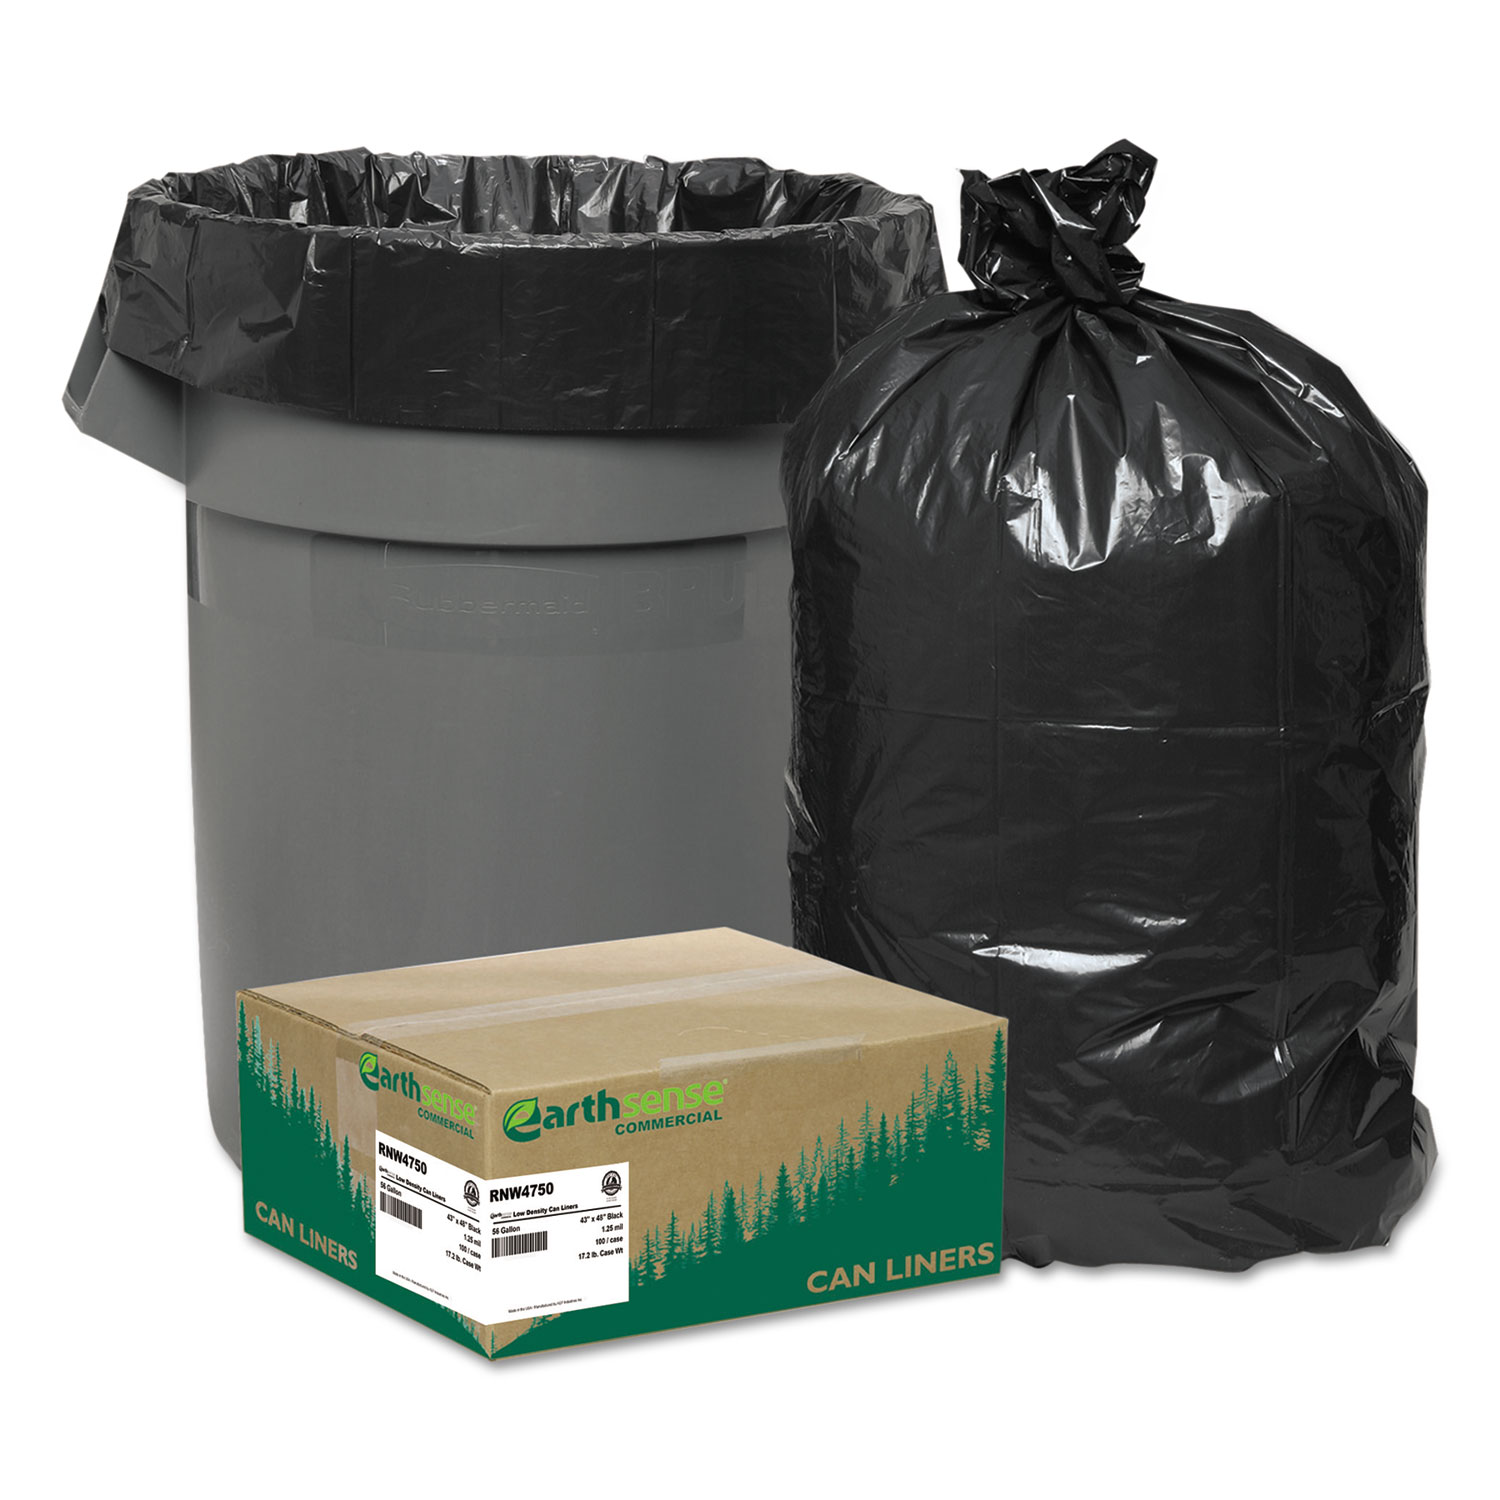  Earthsense Commercial RNW4750 Linear Low Density Recycled Can Liners, 56 gal, 1.25 mil, 43 x 48, Black, 100/Carton (WBIRNW4750) 